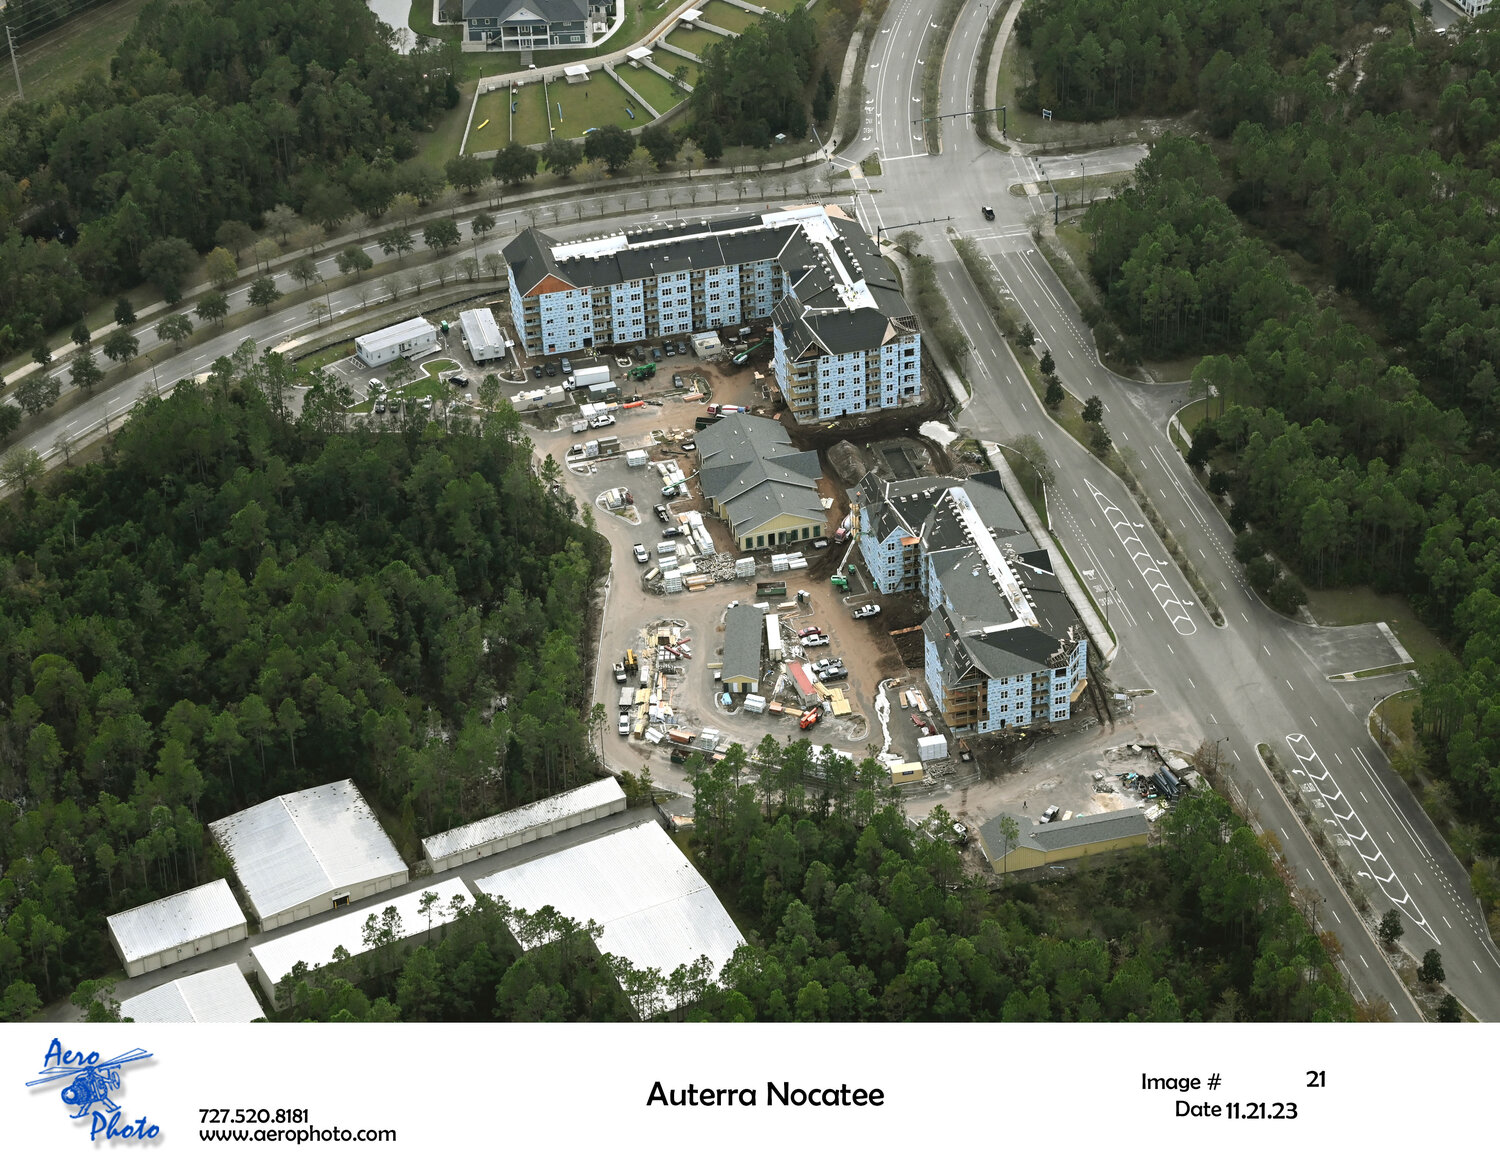 A look at the progress at Rise from above.